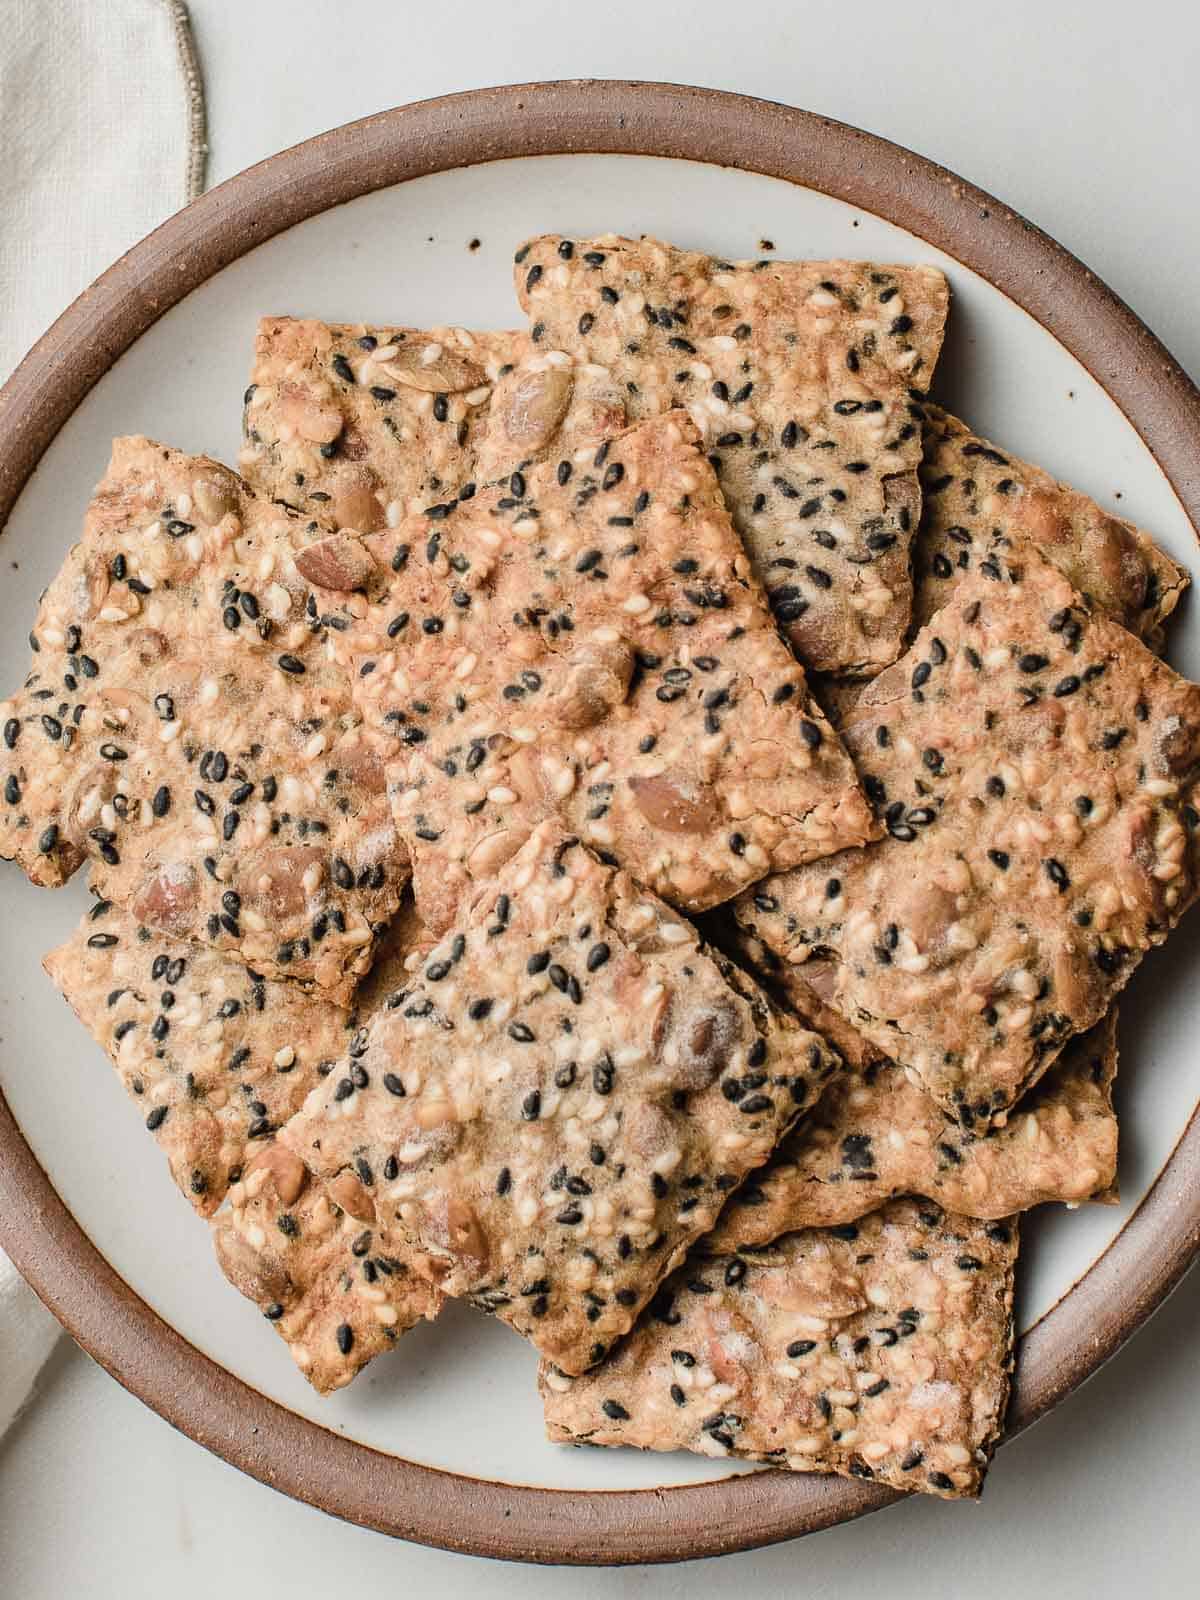 Baked sourdough seed crackers on a plate.